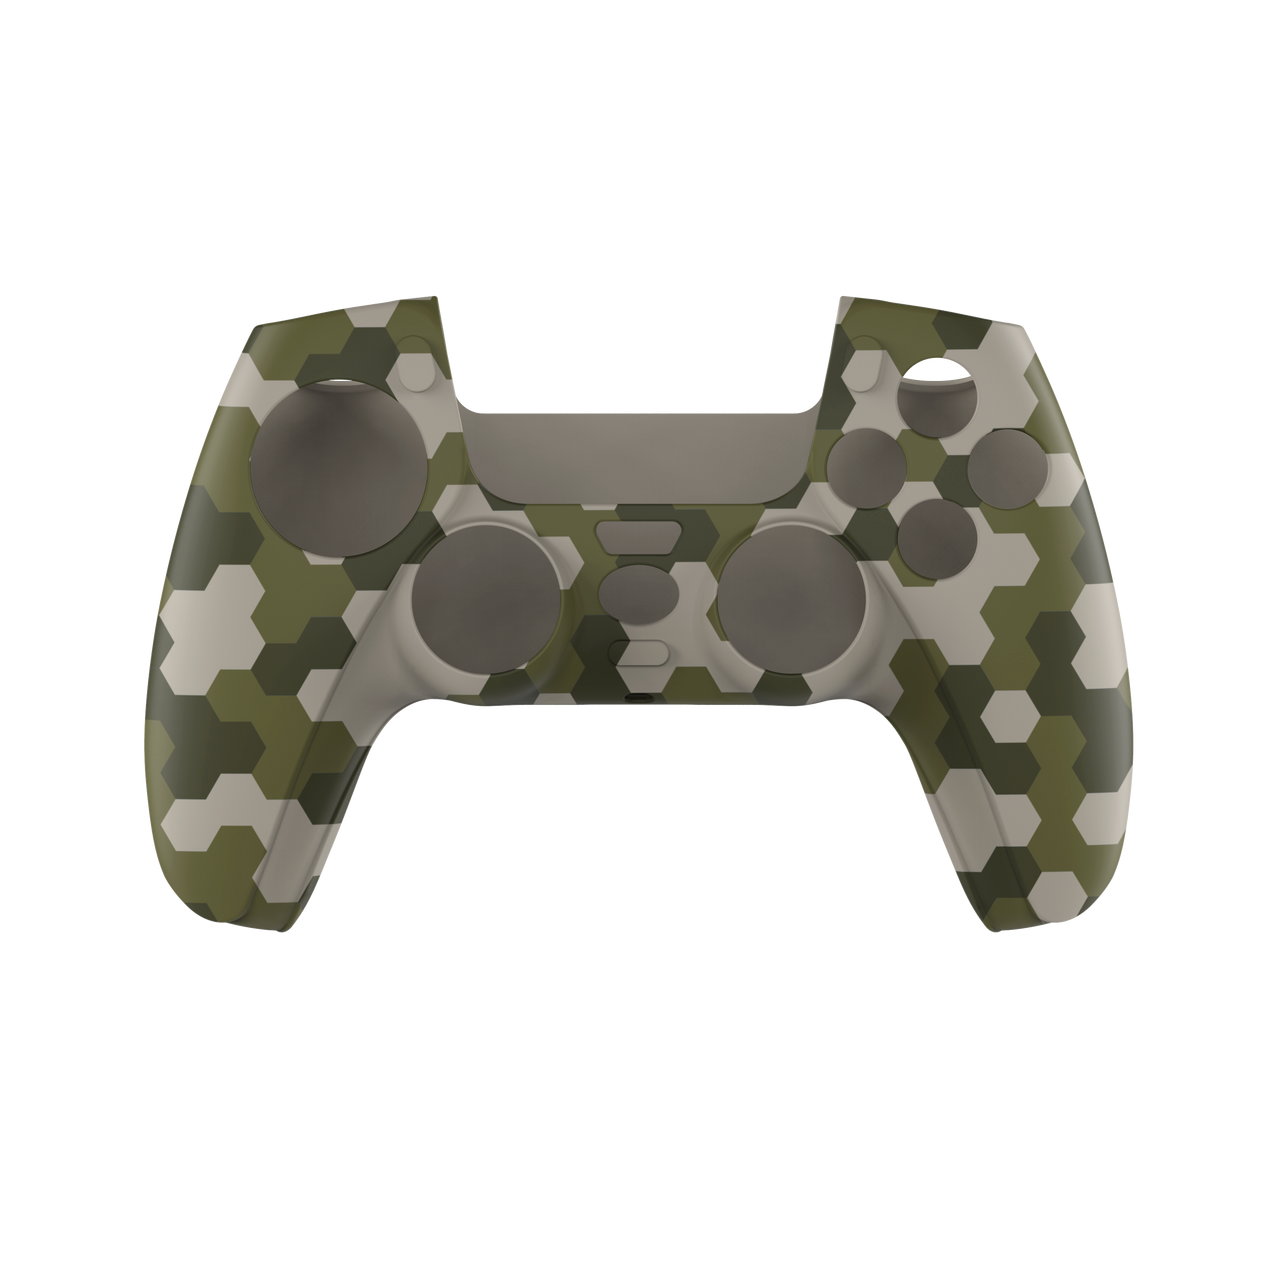 Gioteck Hex Camo Silicone Skin for PlayStation 5